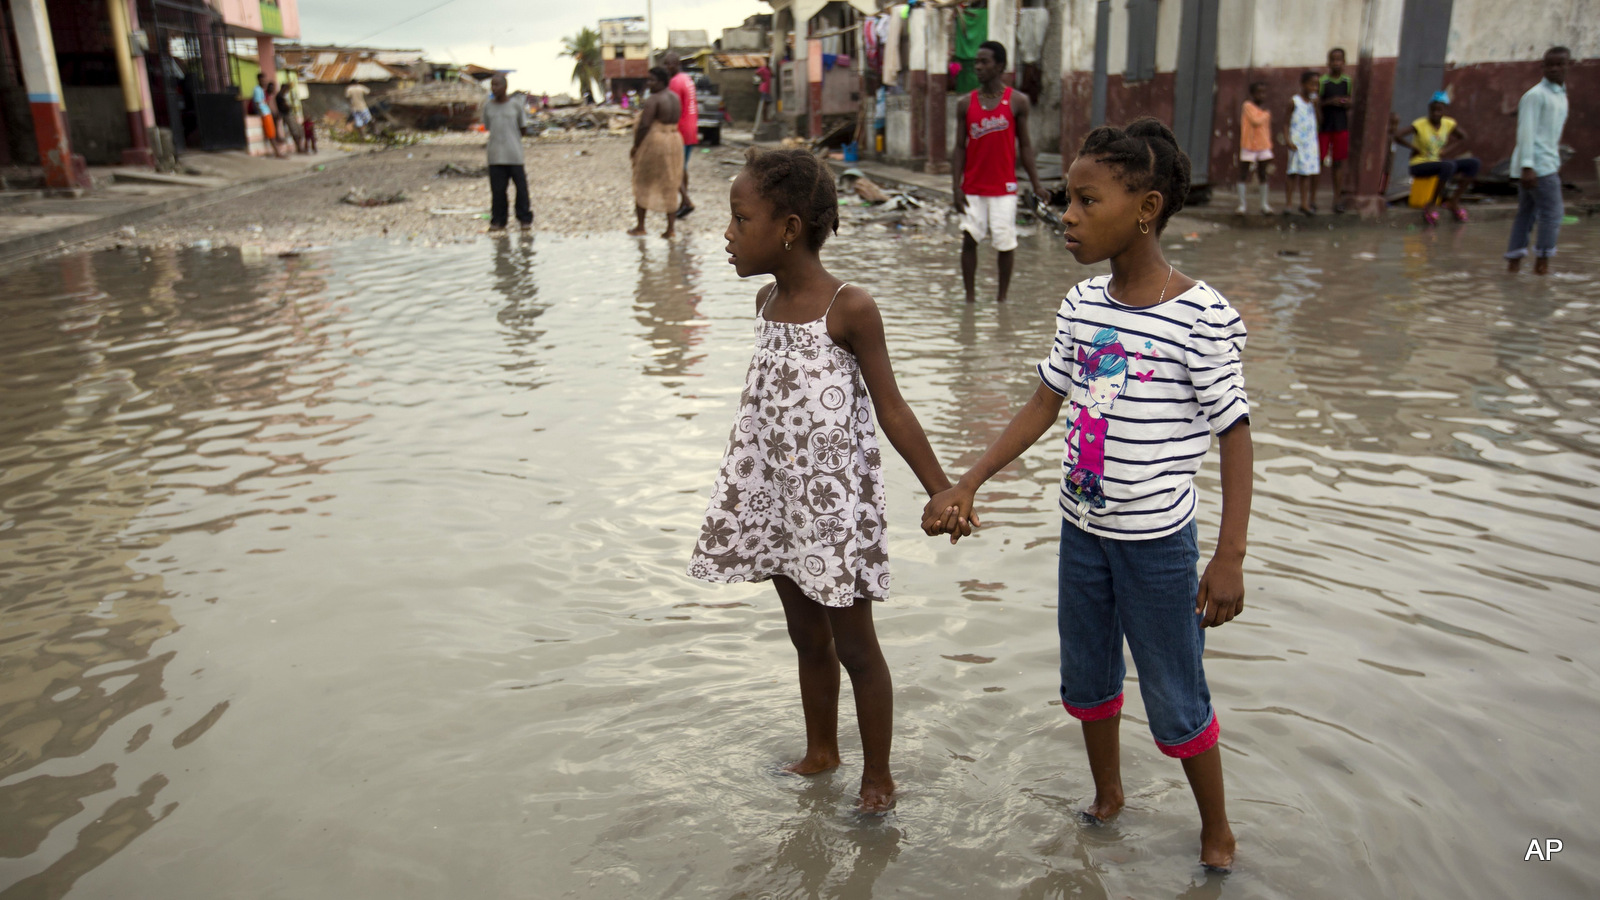 Girls hold hands as they help each other wade through a flooded street after the passing of Hurricane Matthew in Les Cayes, Haiti, Thursday, Oct. 6, 2016. Two days after the storm rampaged across the country's remote southwestern peninsula, authorities and aid workers still lack a clear picture of what they fear is the country's biggest disaster in years.